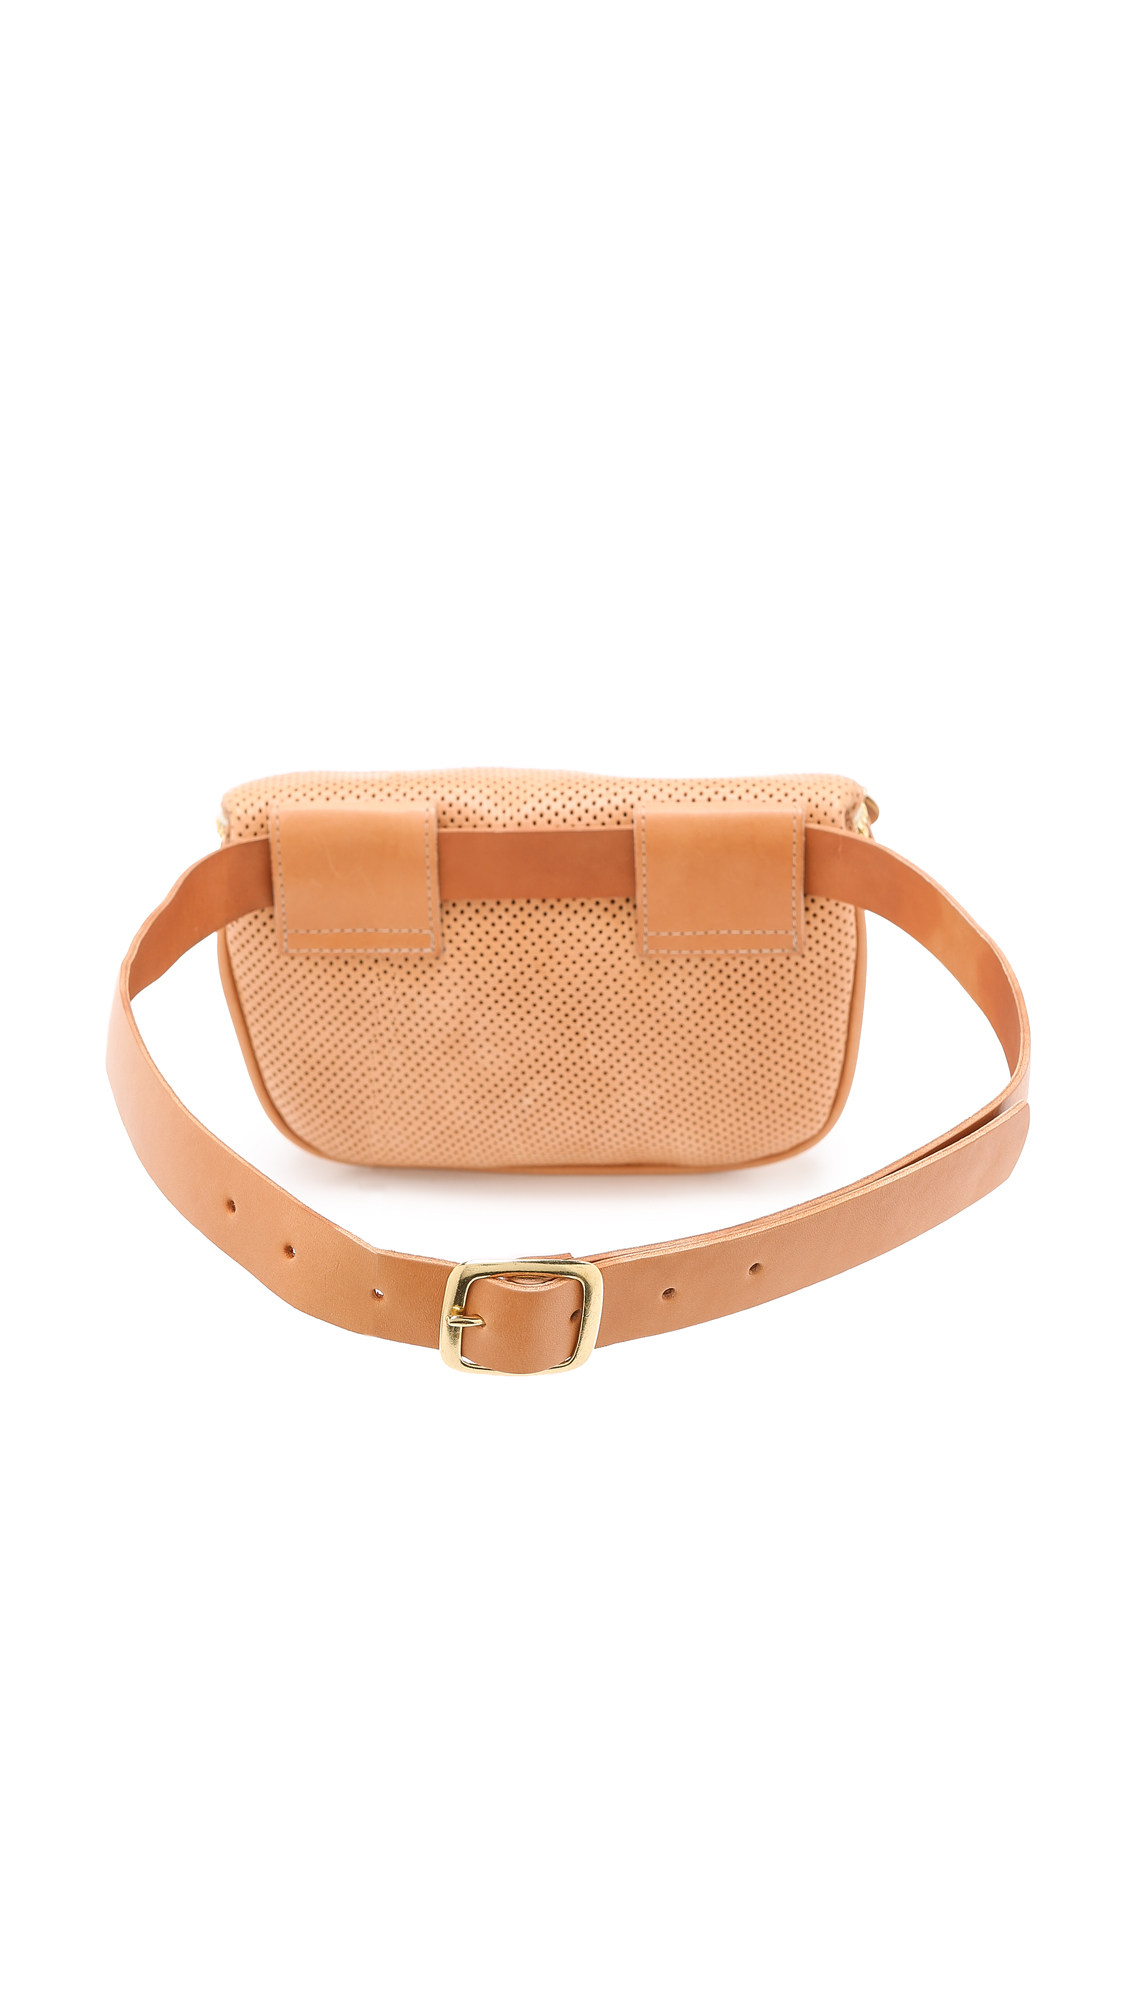 Clare V. Supreme Fanny Pack - Natural Perf - Lyst